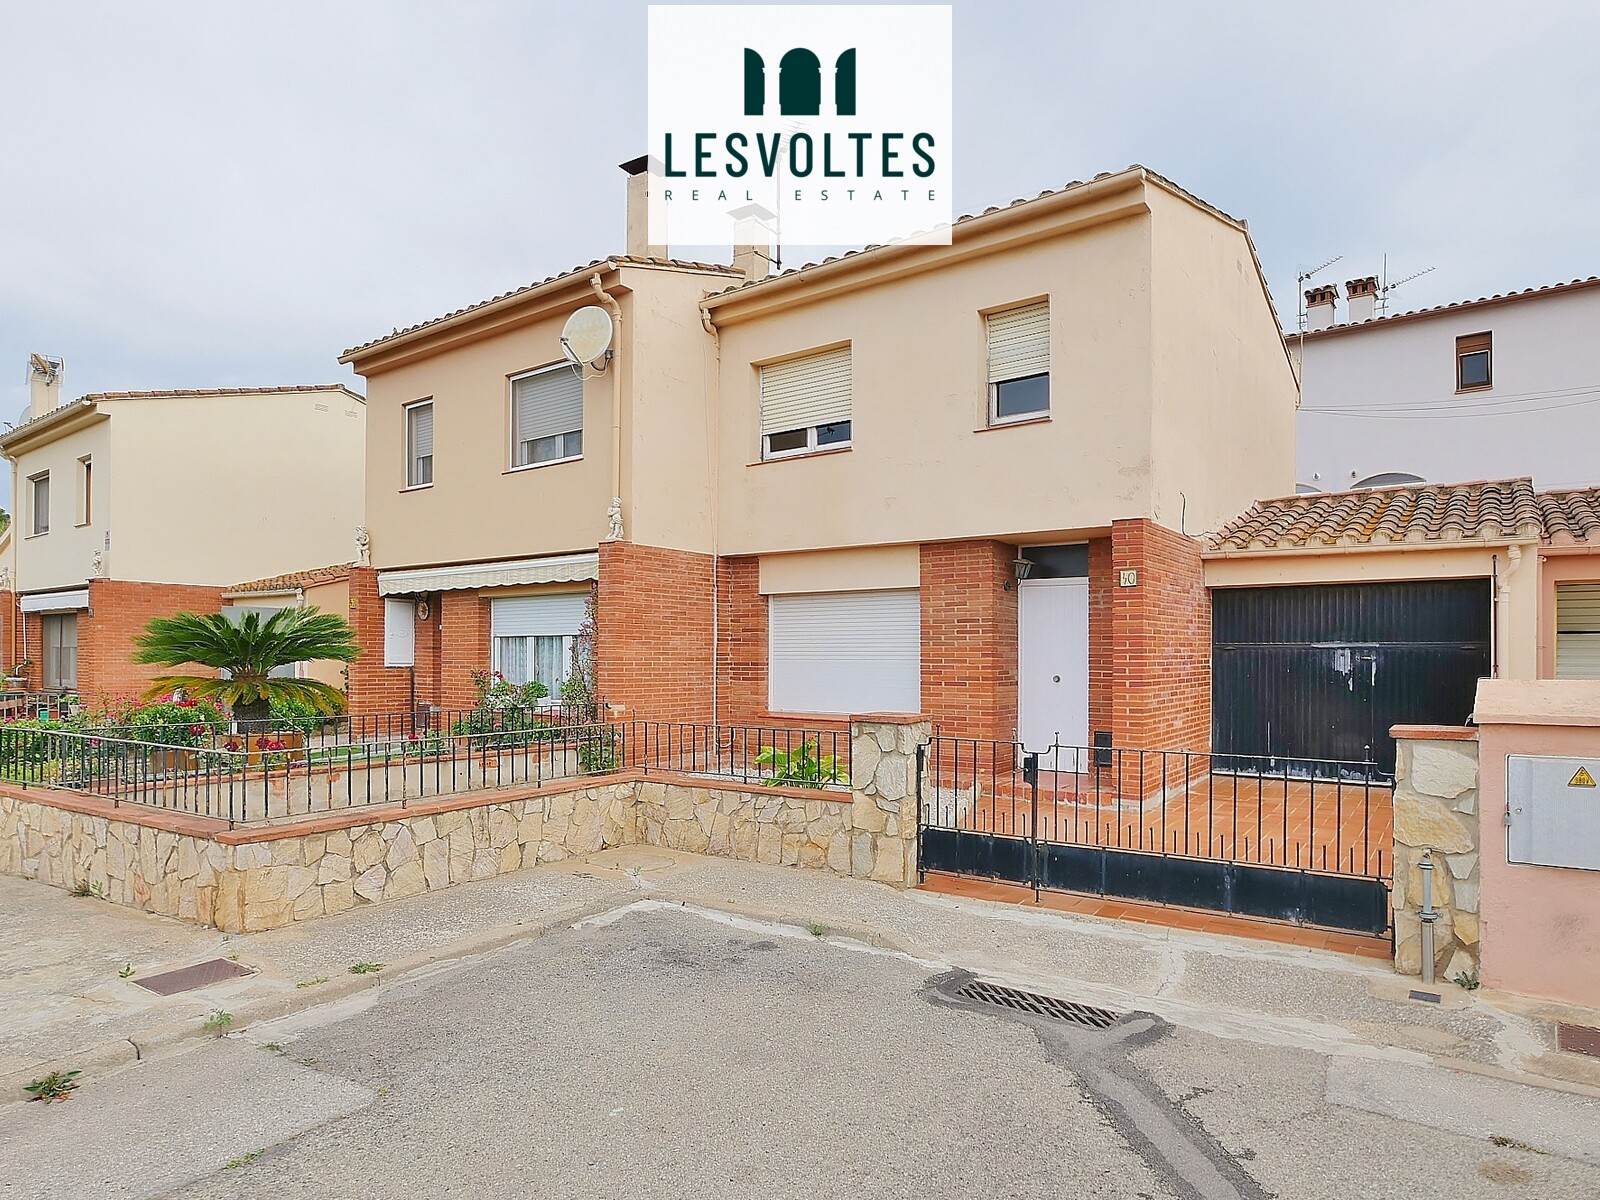 THREE BEDROOM HOUSE WITH GARDEN AND GARAGE IN PALAFRUGELL